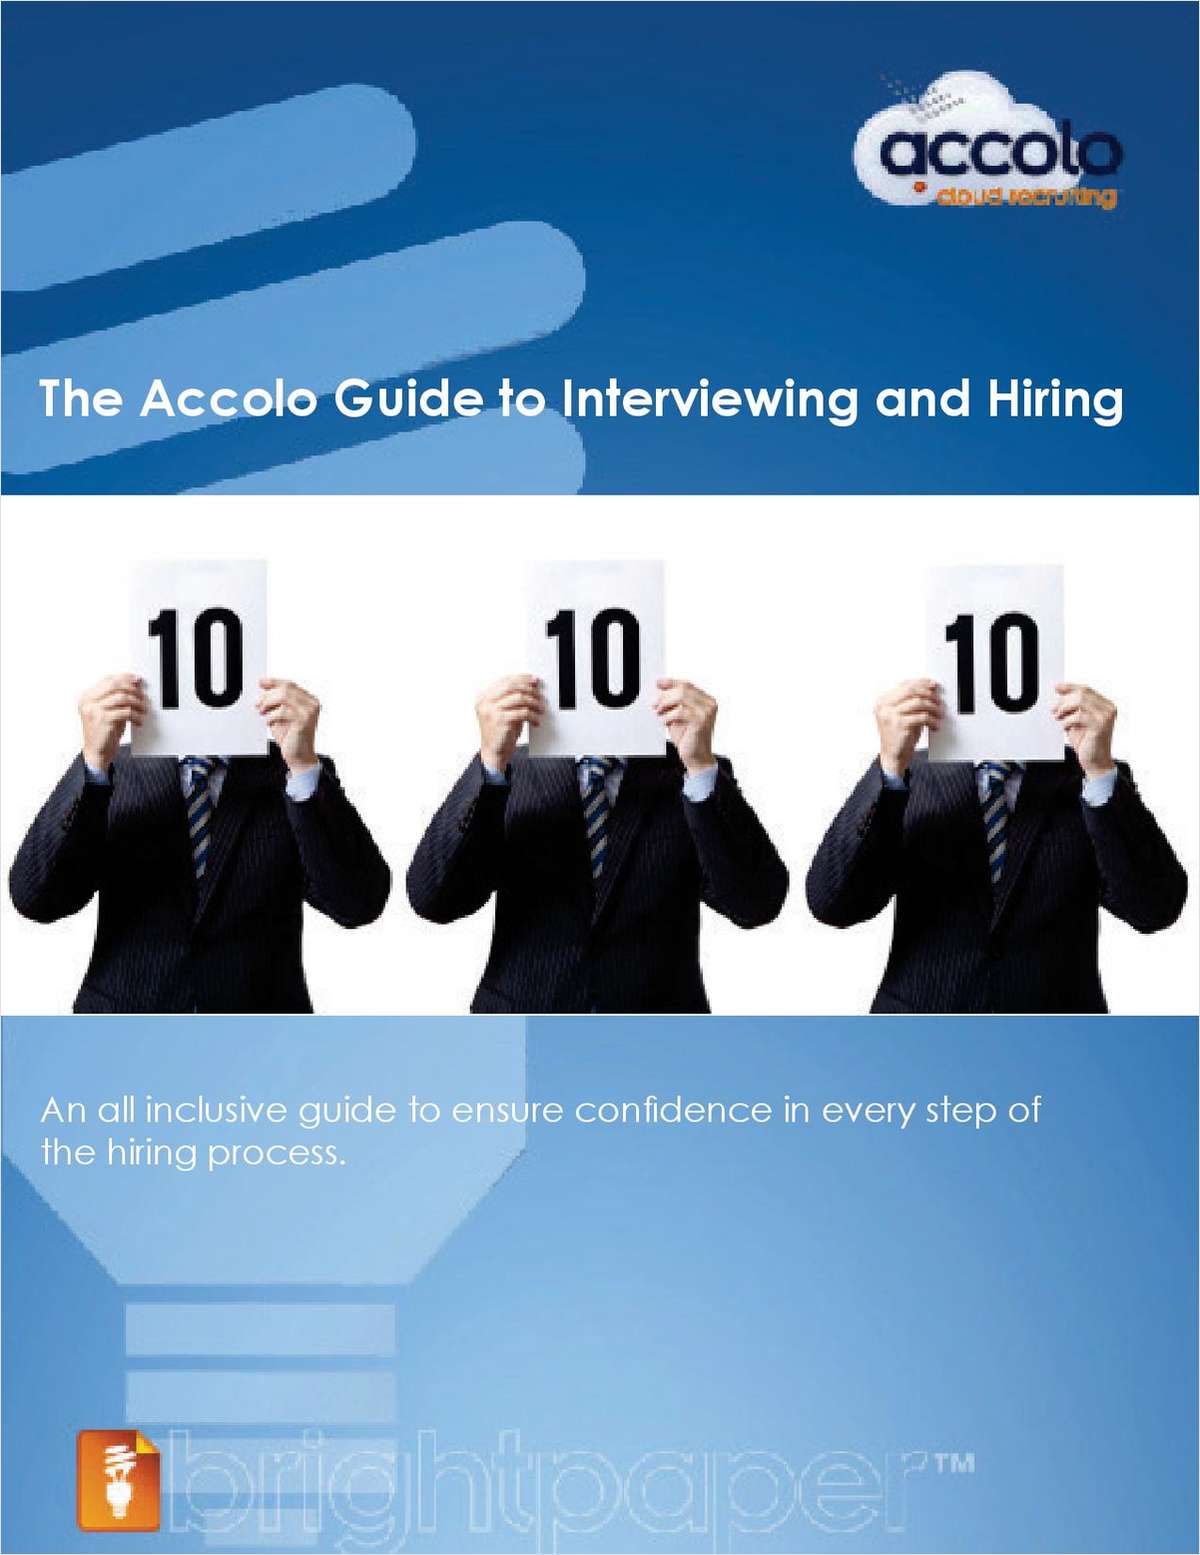 The Accolo Guide to Interviewing and Hiring